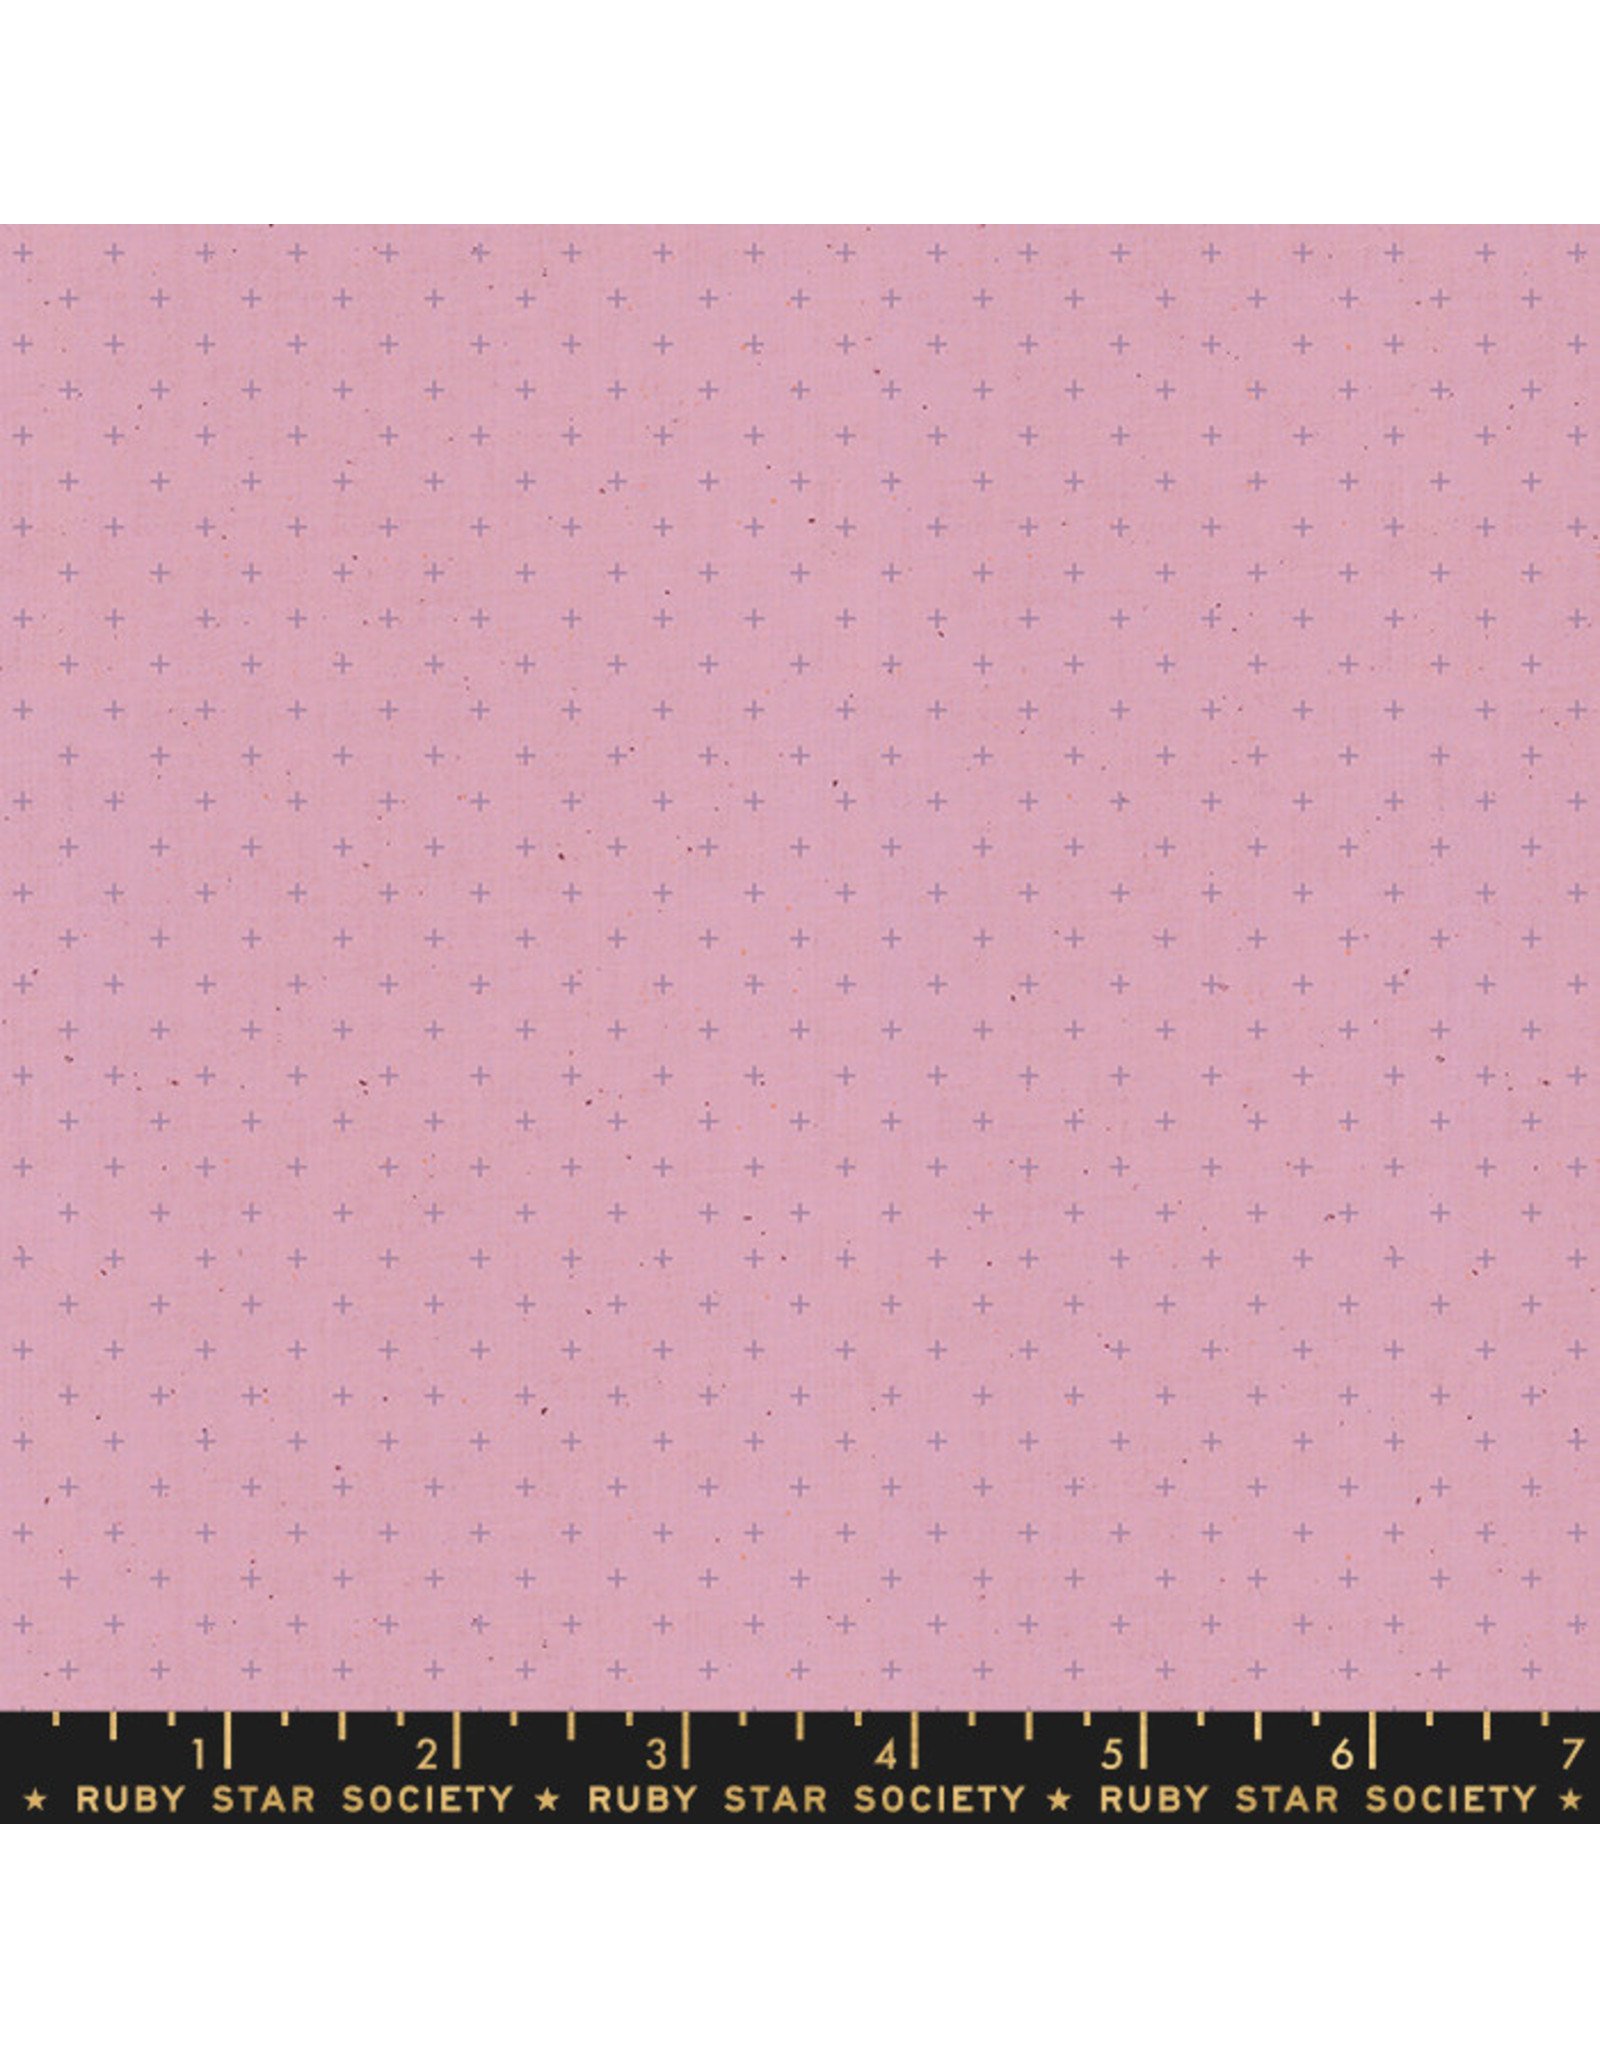 Ruby Star Society Add it Up - Lavender coupon (± 25 x 110 cm)